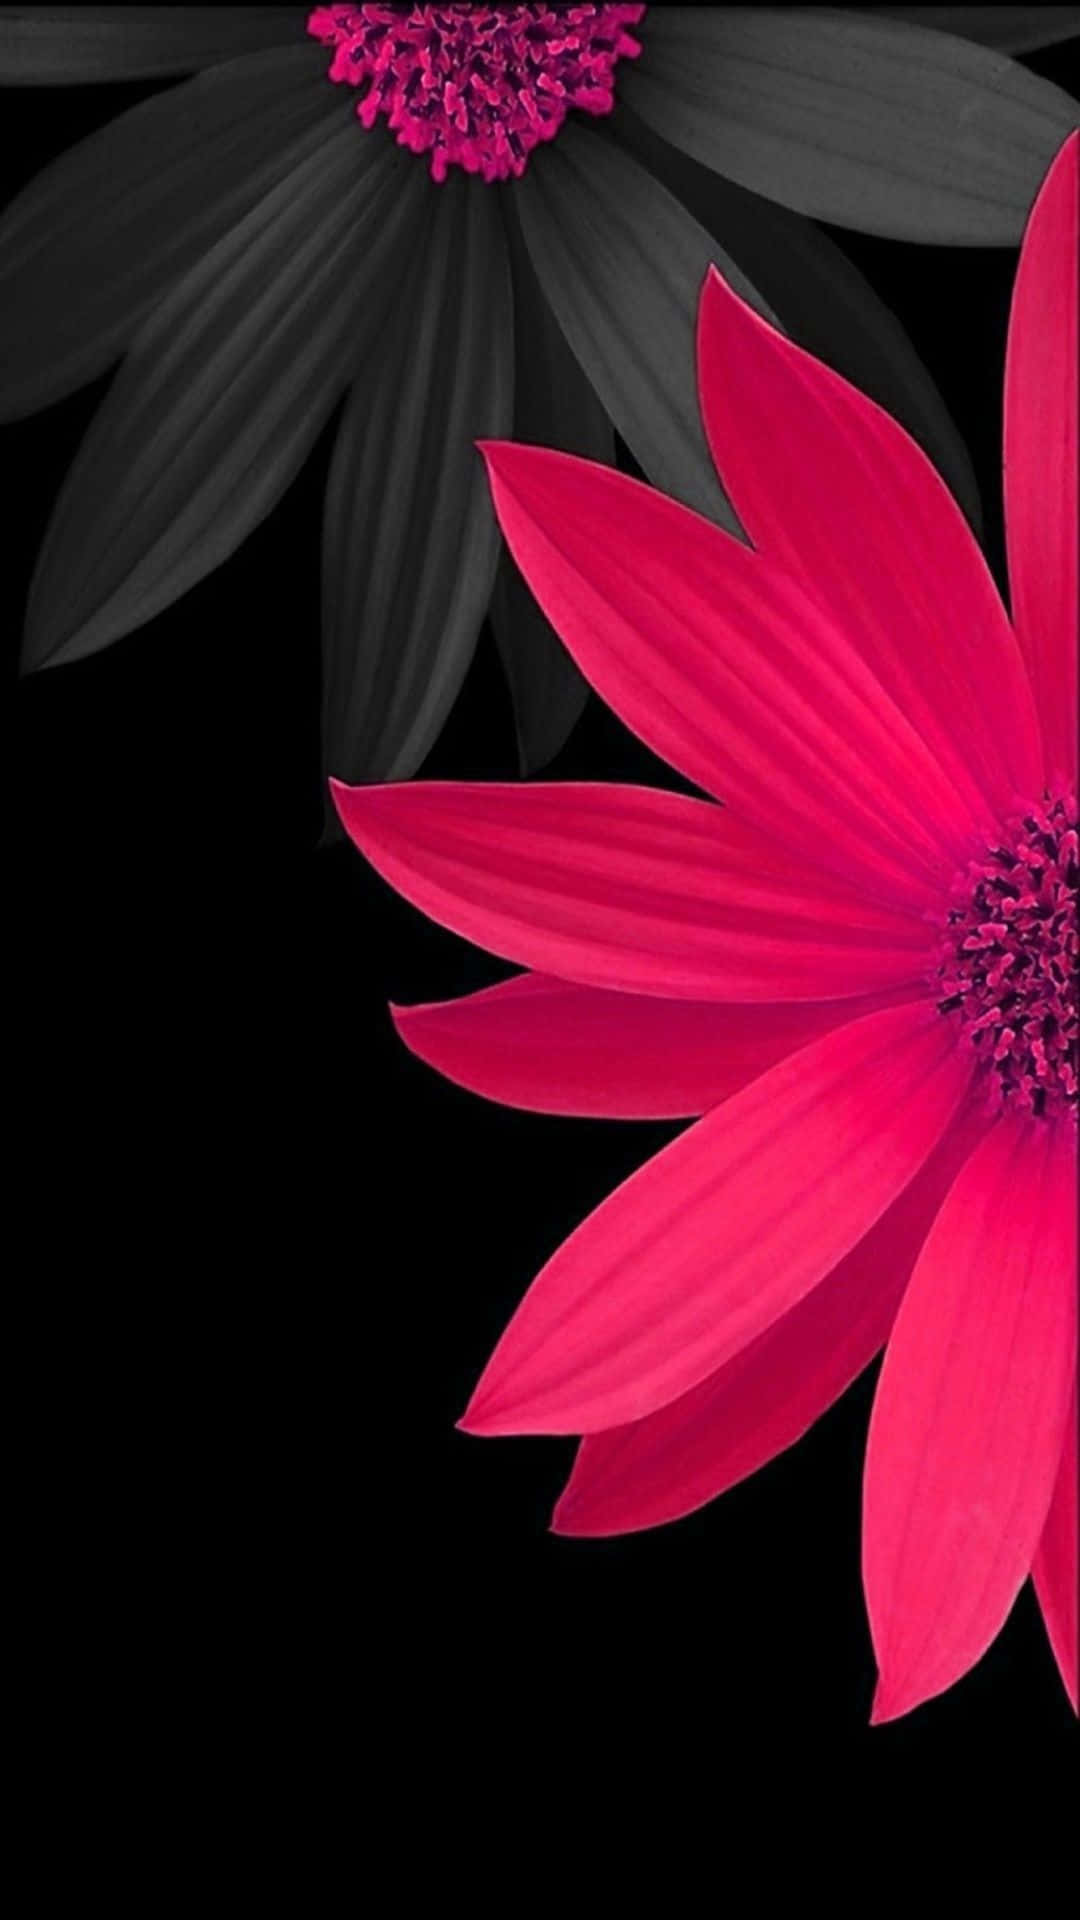 Daisy Flowers In Black And Pink iPhone Wallpaper